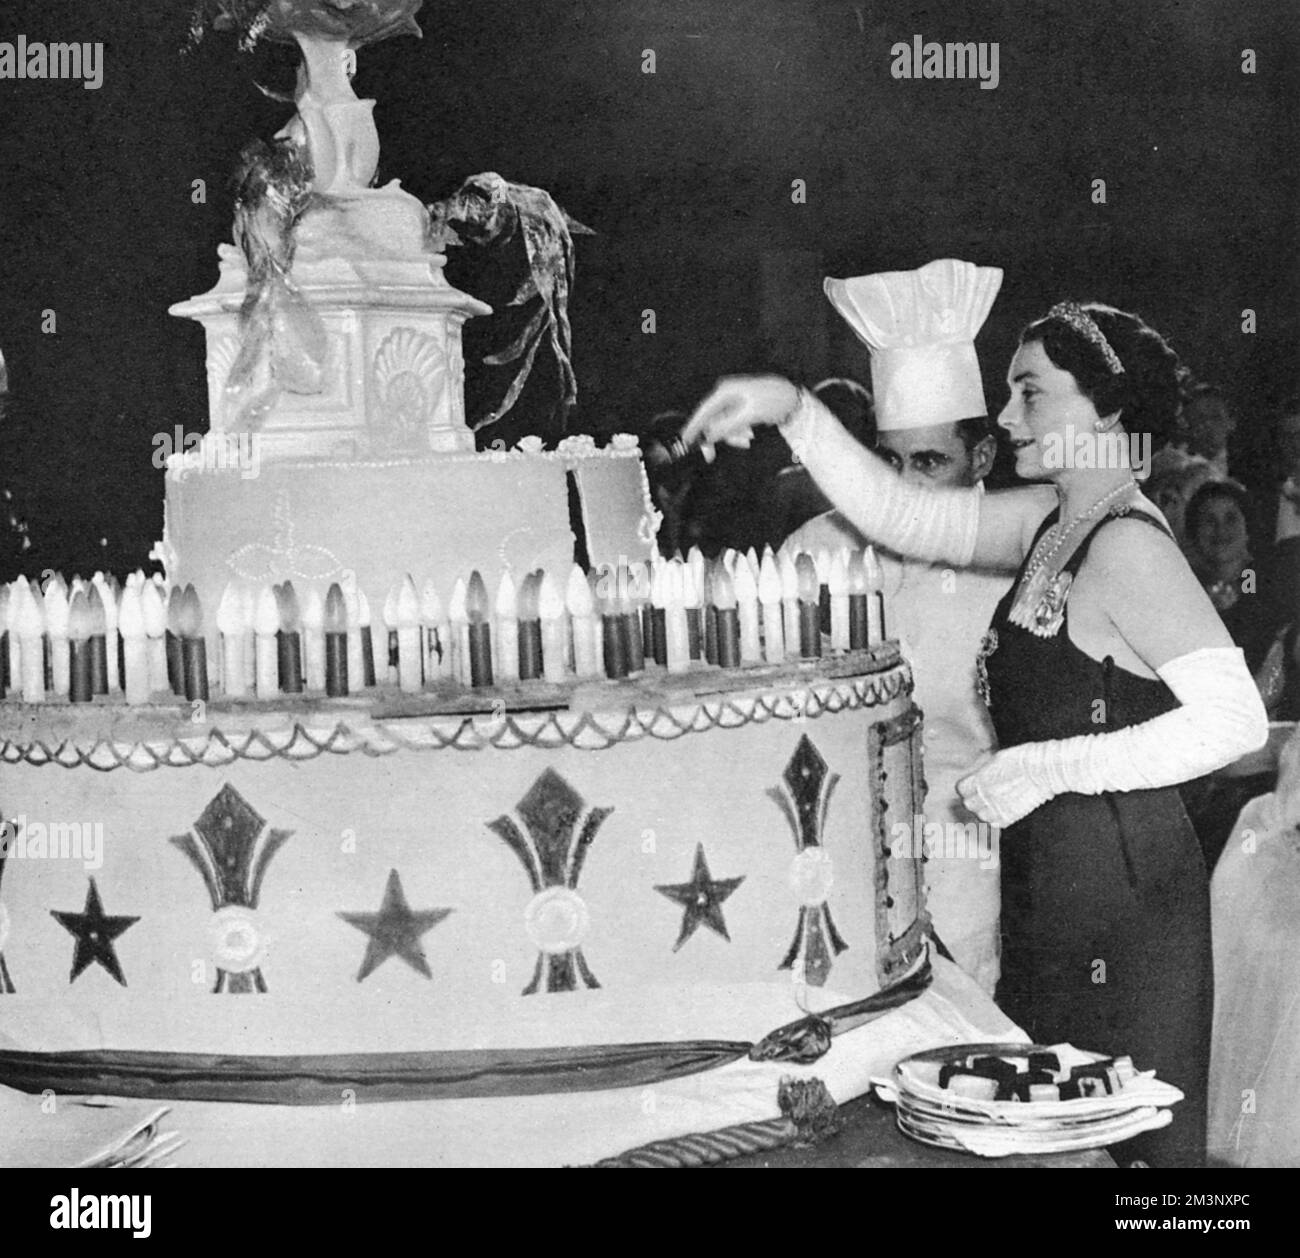 The Duchess of Gloucester (1901 -2004) cutting the giant cake holding 194 electric candles representing the number of years since the birth of Queen Charlotte at the ball named after her.  Queen Charlotte's Ball, held in honour of the wife of King George III and revived in 1925 to raise funds for the maternity hospital of the same name was one of the highlights of the London Season for a debutante.  All the girls would be dressed in white, and would dip into a carefully choreographed curtsy as the cake was cut.  There was apparently quite a scrum to get a piece of the cake afterwards!     Date Stock Photo